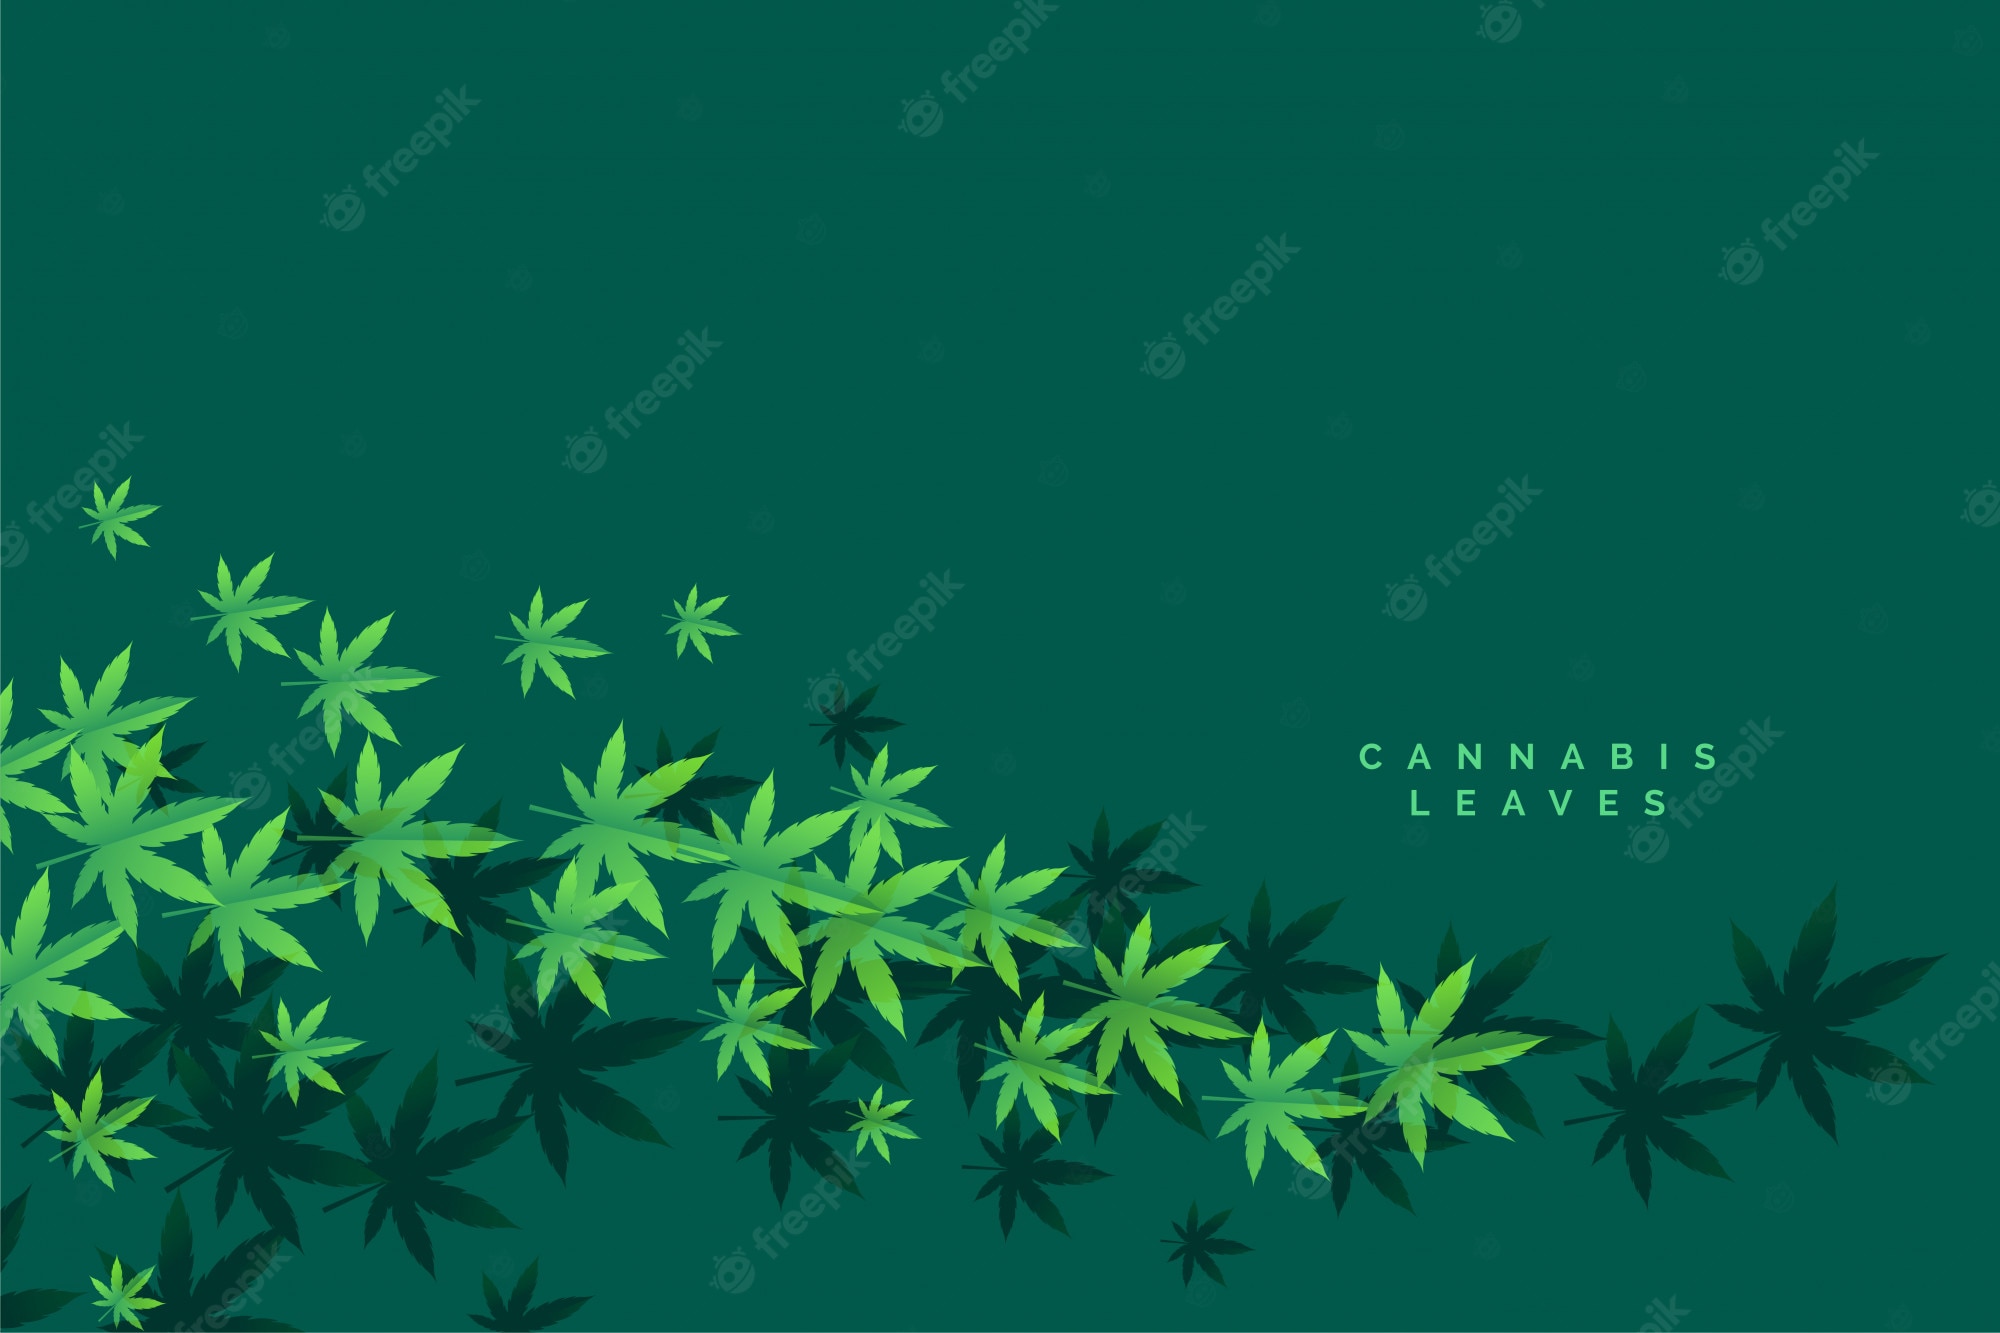 Cool Weed Symbol Wallpapers